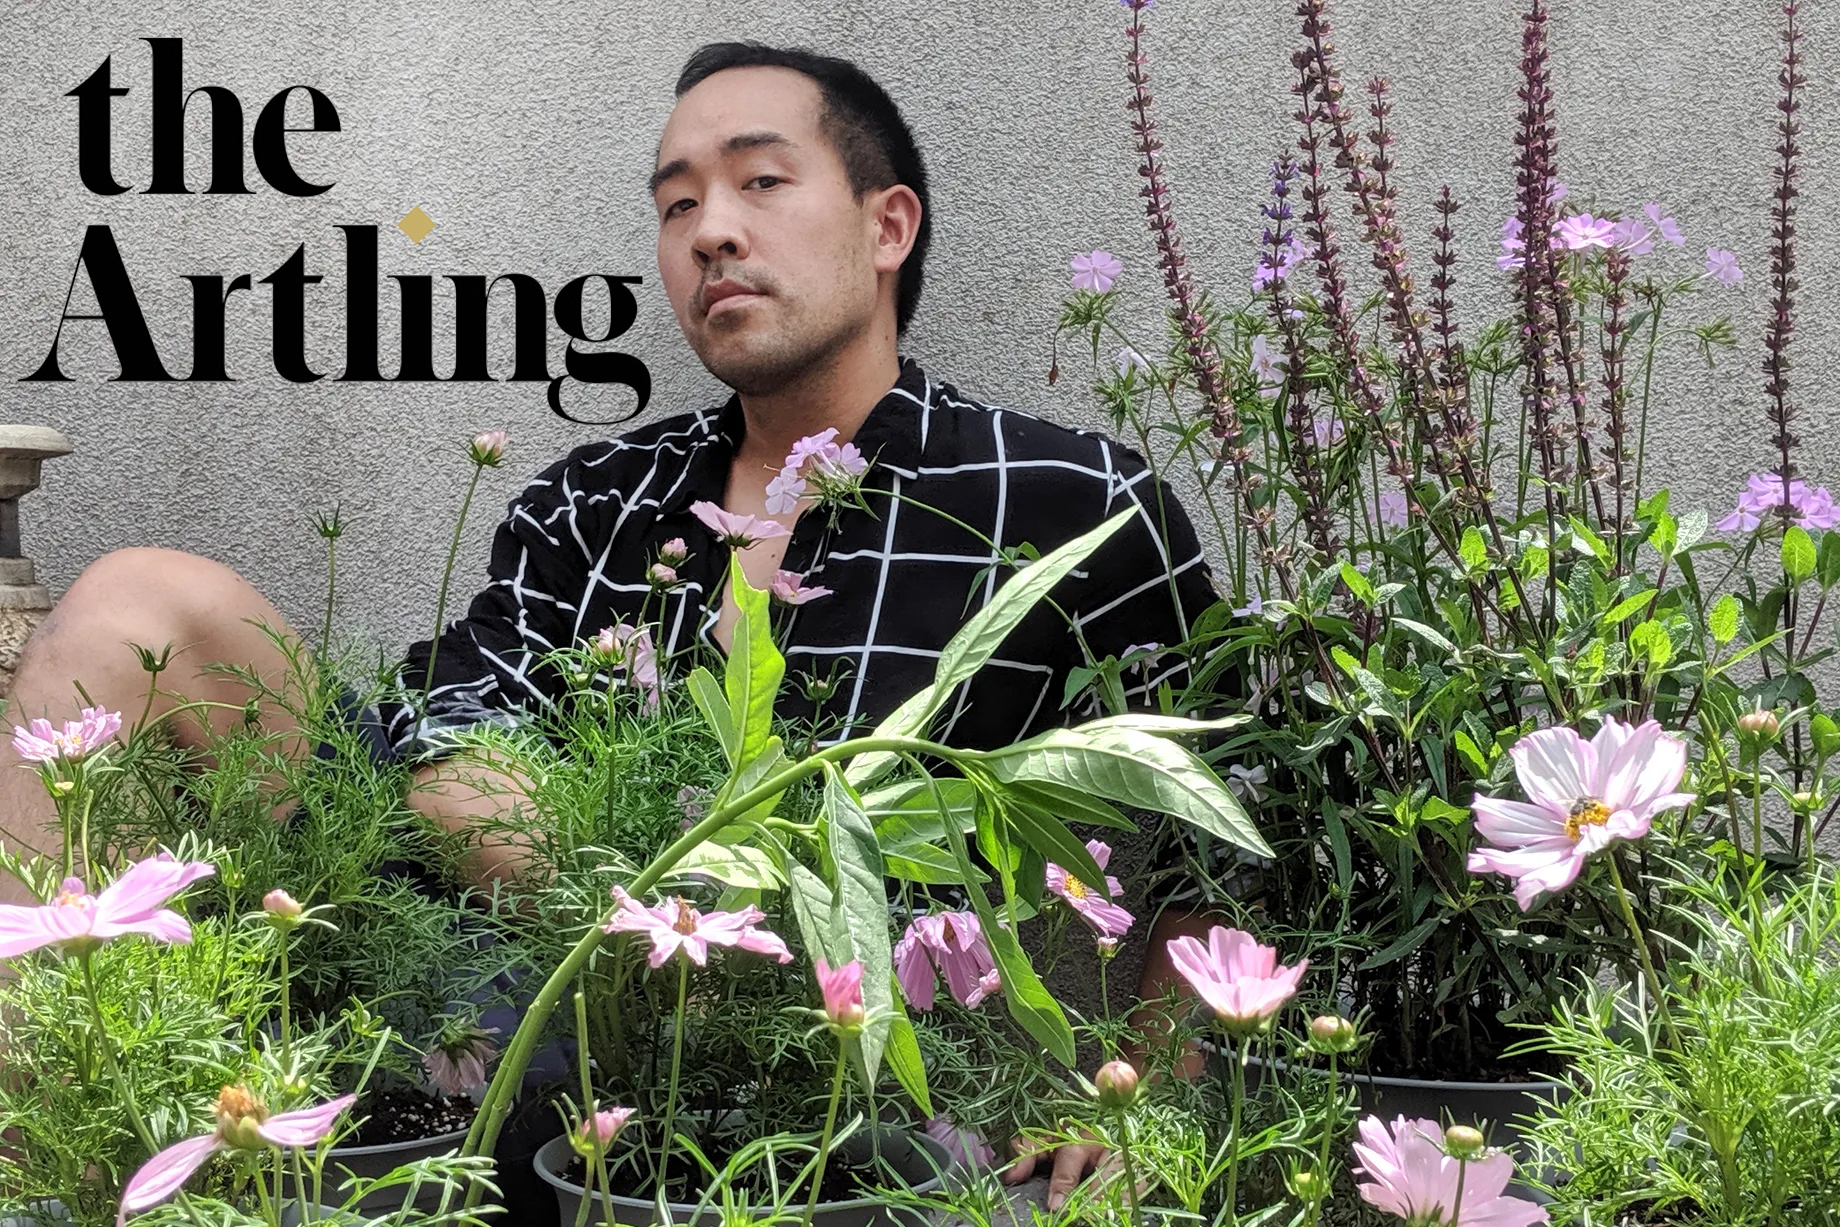 the Artling, 2019 | Artist Ben Tong On Why He’s Drawn To Awkwardness